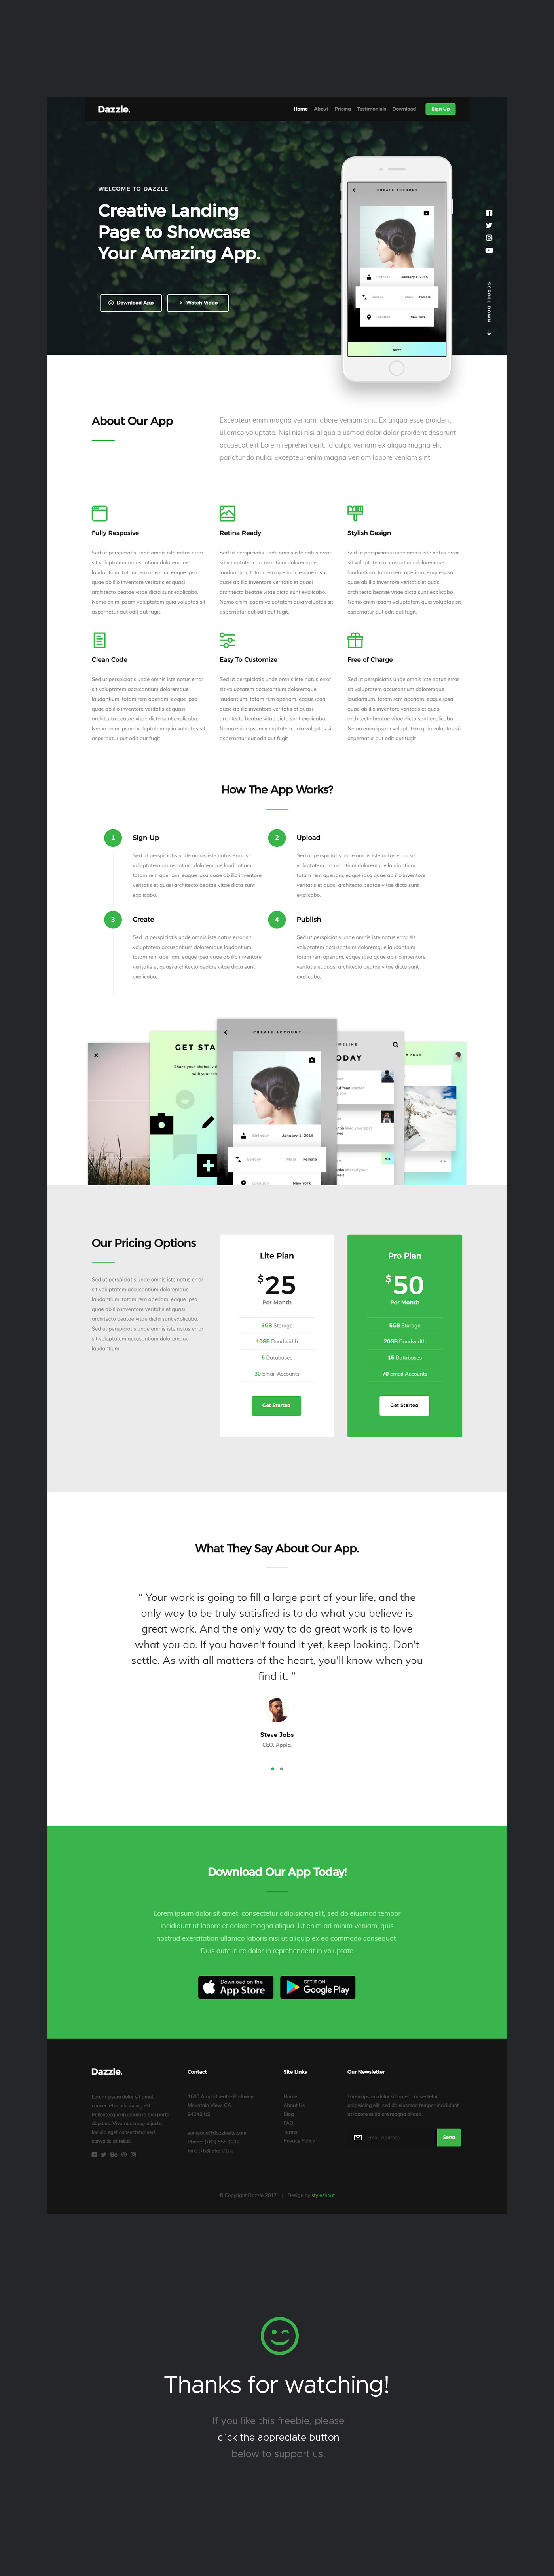 free Website One Page HTML css app Responsive landing page template mobile